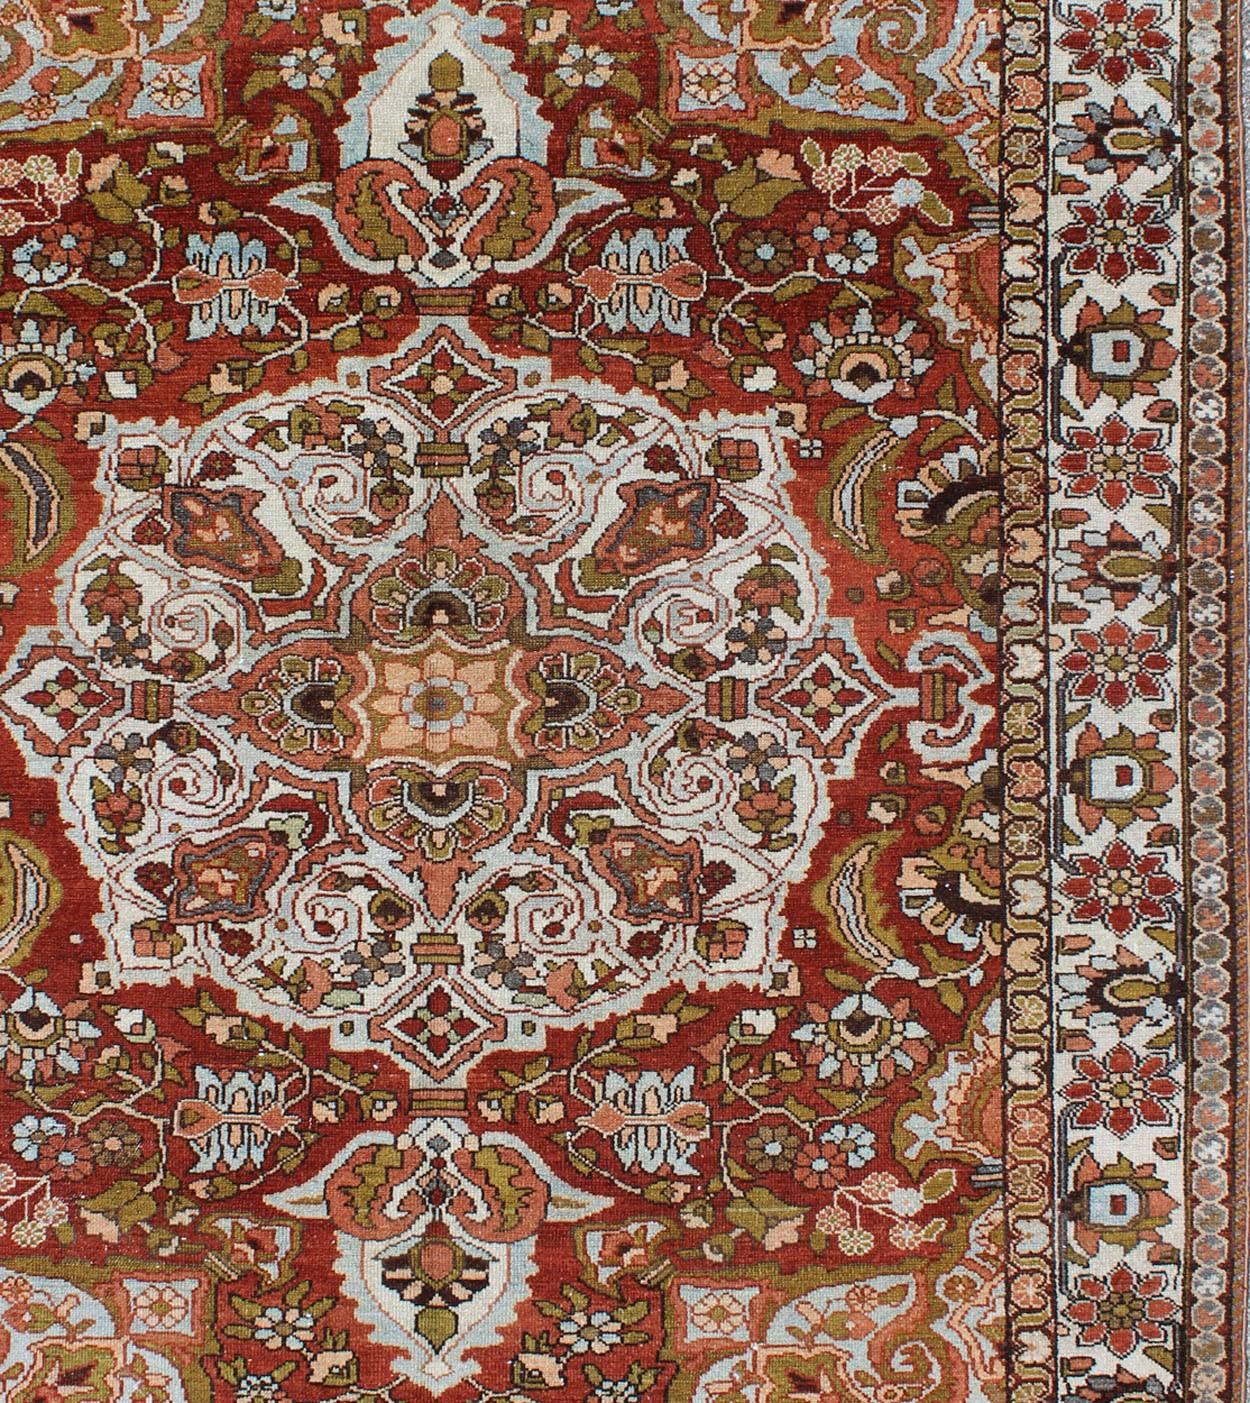 Hand-Knotted Antique Persian Bakhtiari Rug With Classic Ornate Central Medallion Design For Sale